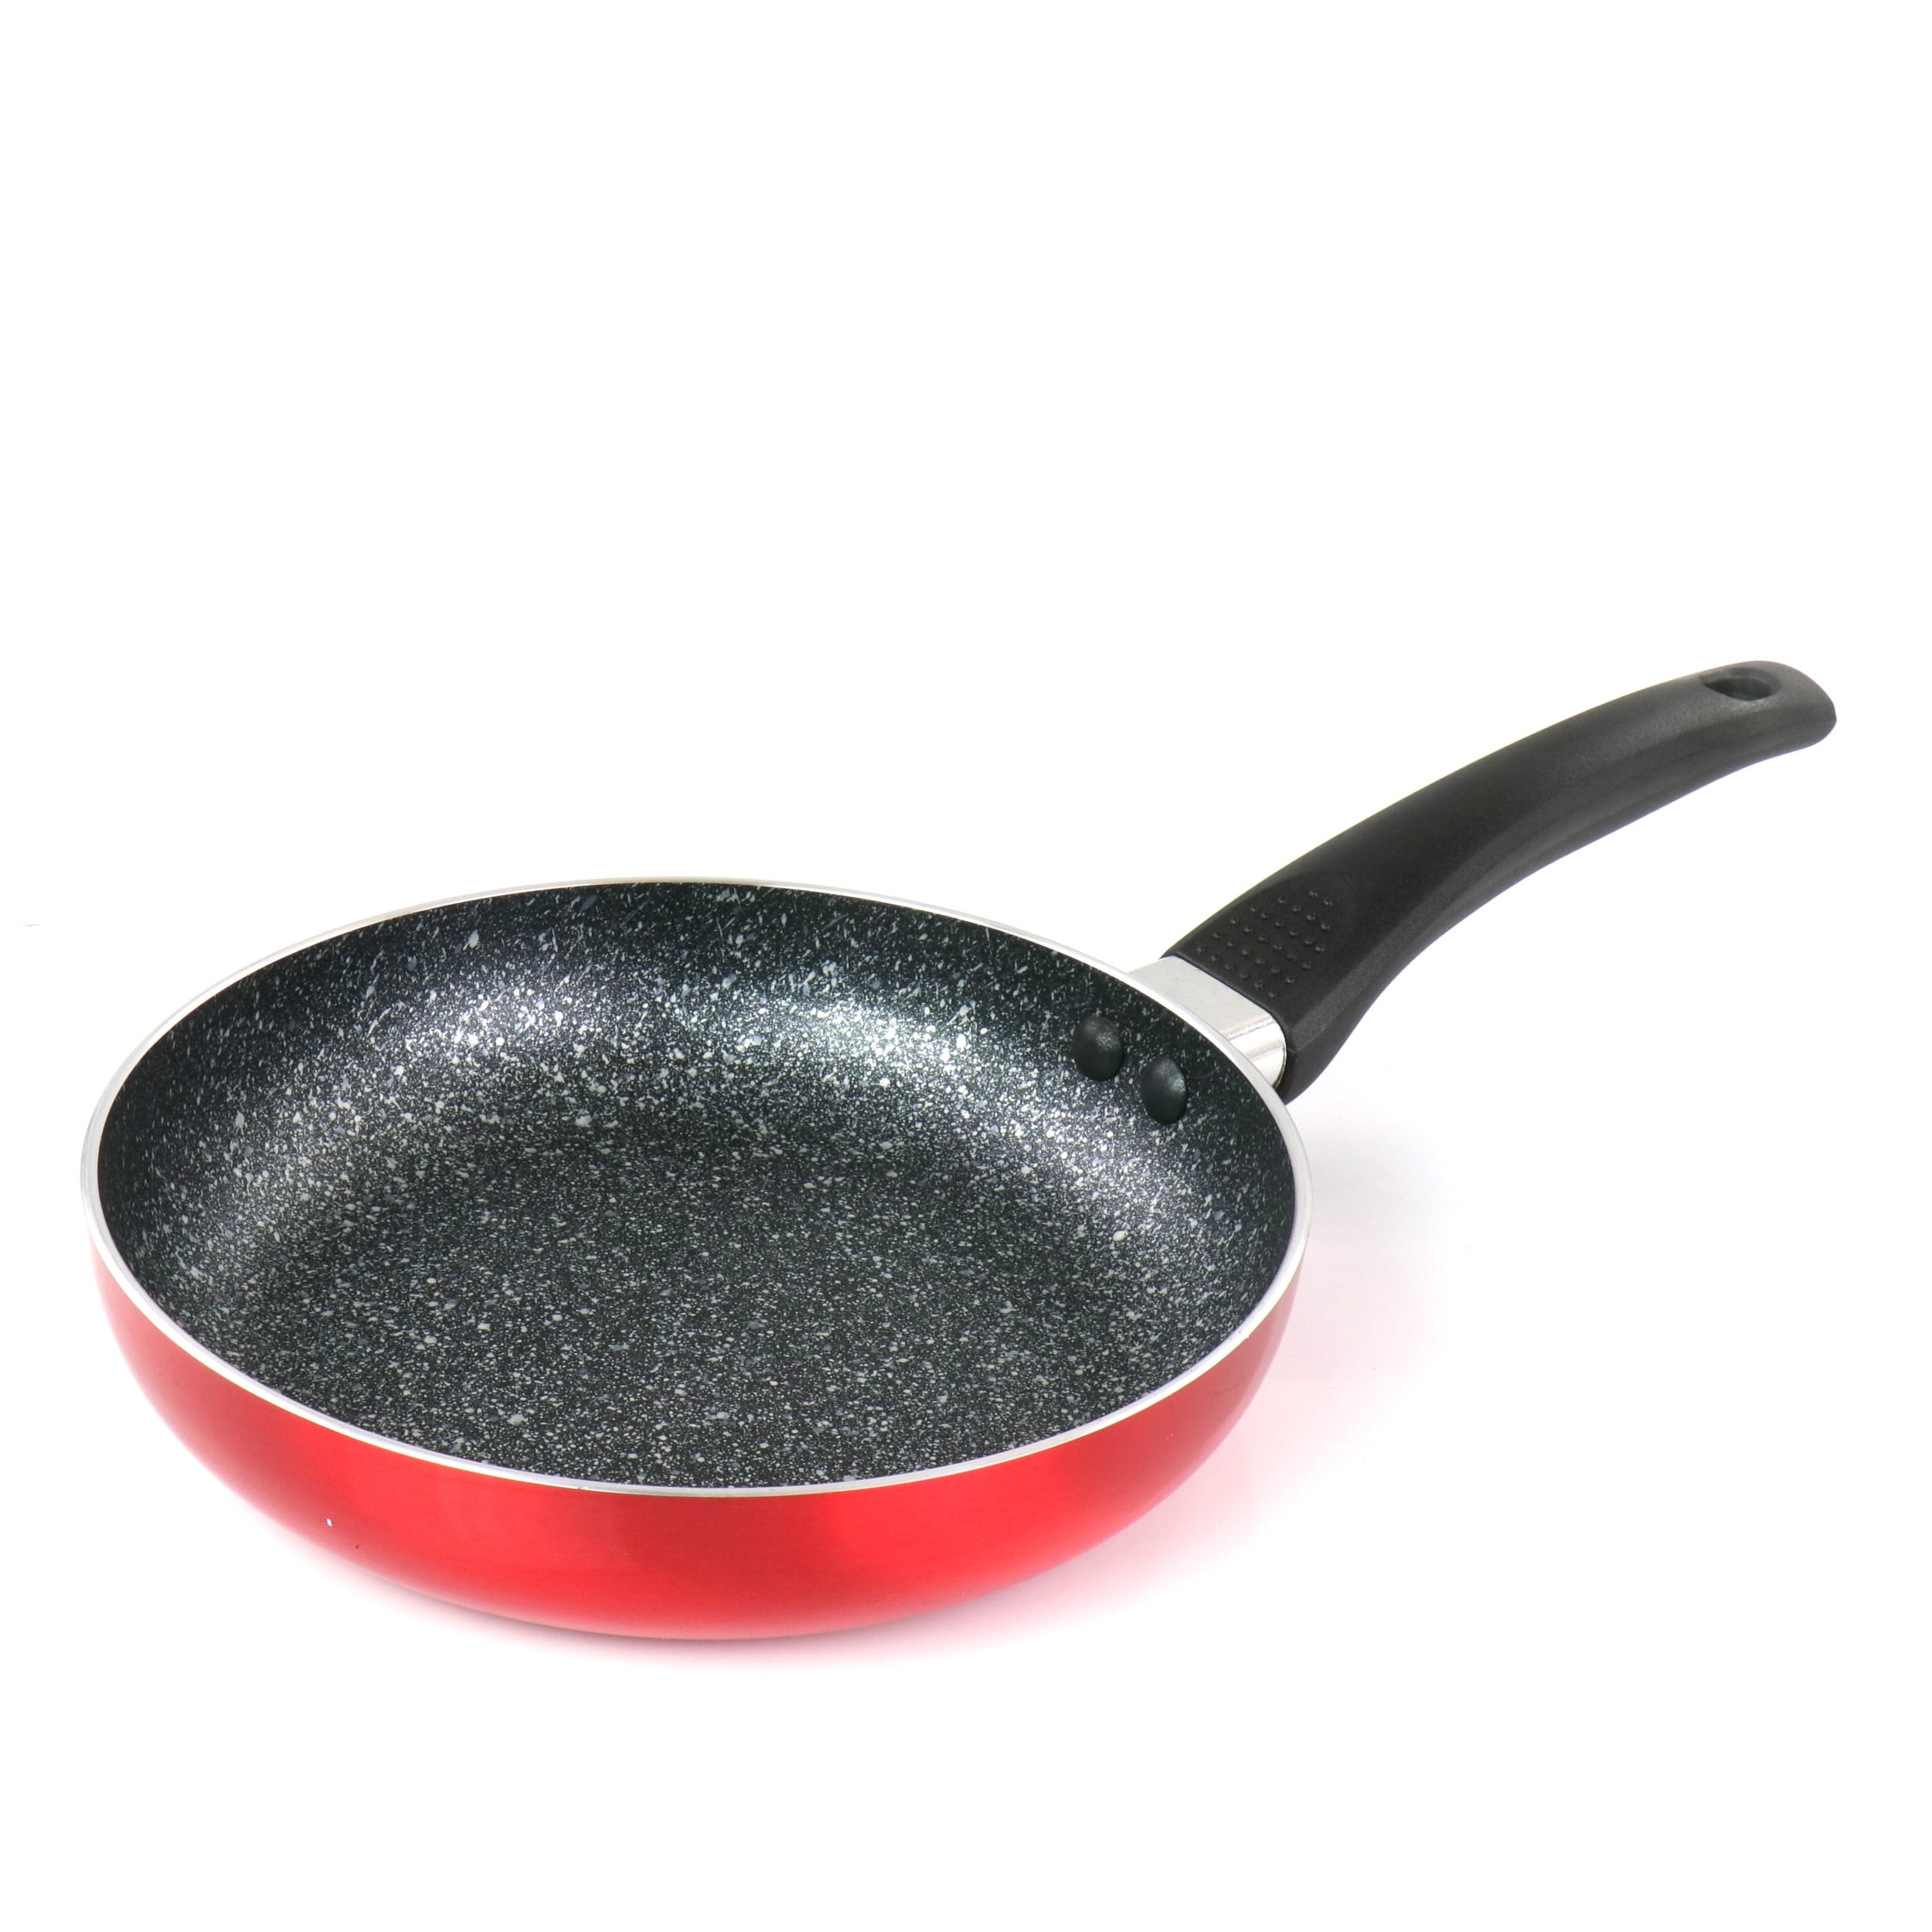 https://ak1.ostkcdn.com/images/products/is/images/direct/f3982135e1de01344c3d3058bc6cf4c7bc874a10/Oster-8-Inch-Red-Aluminum-Non-Stick-Frying-Pan-with-Bakelite-Handle.jpg